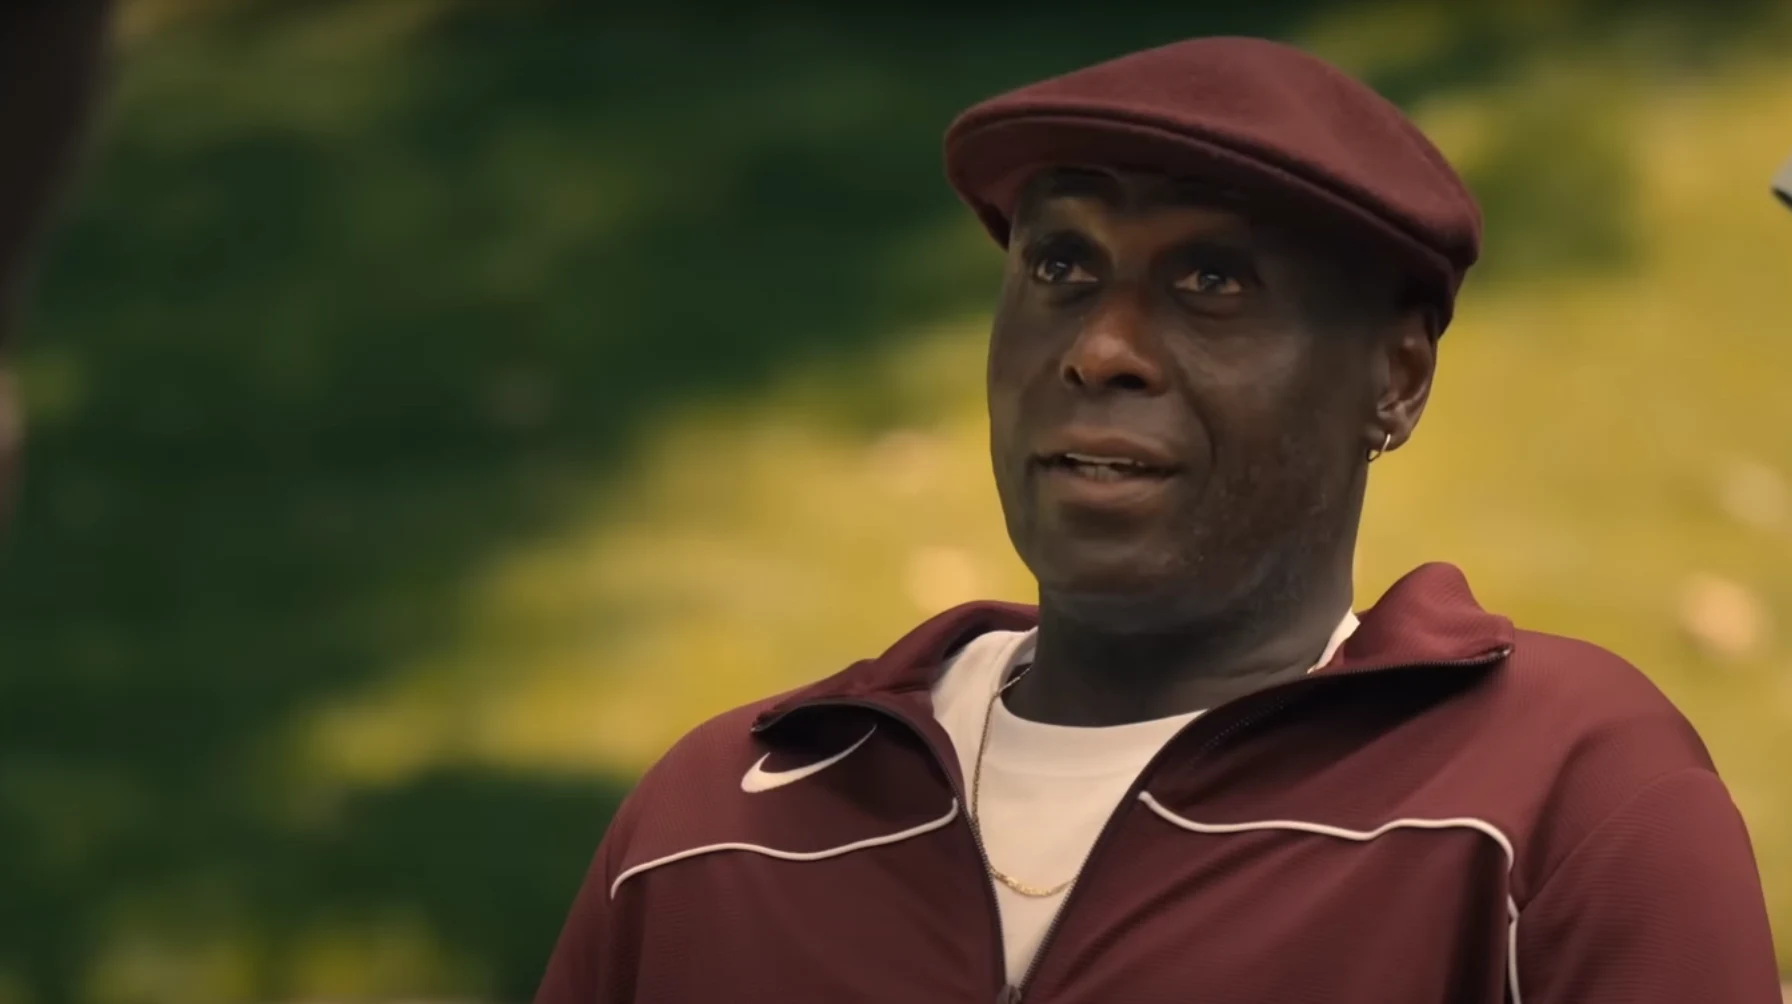 Lance Reddick was a super talented actor and great person. He will be